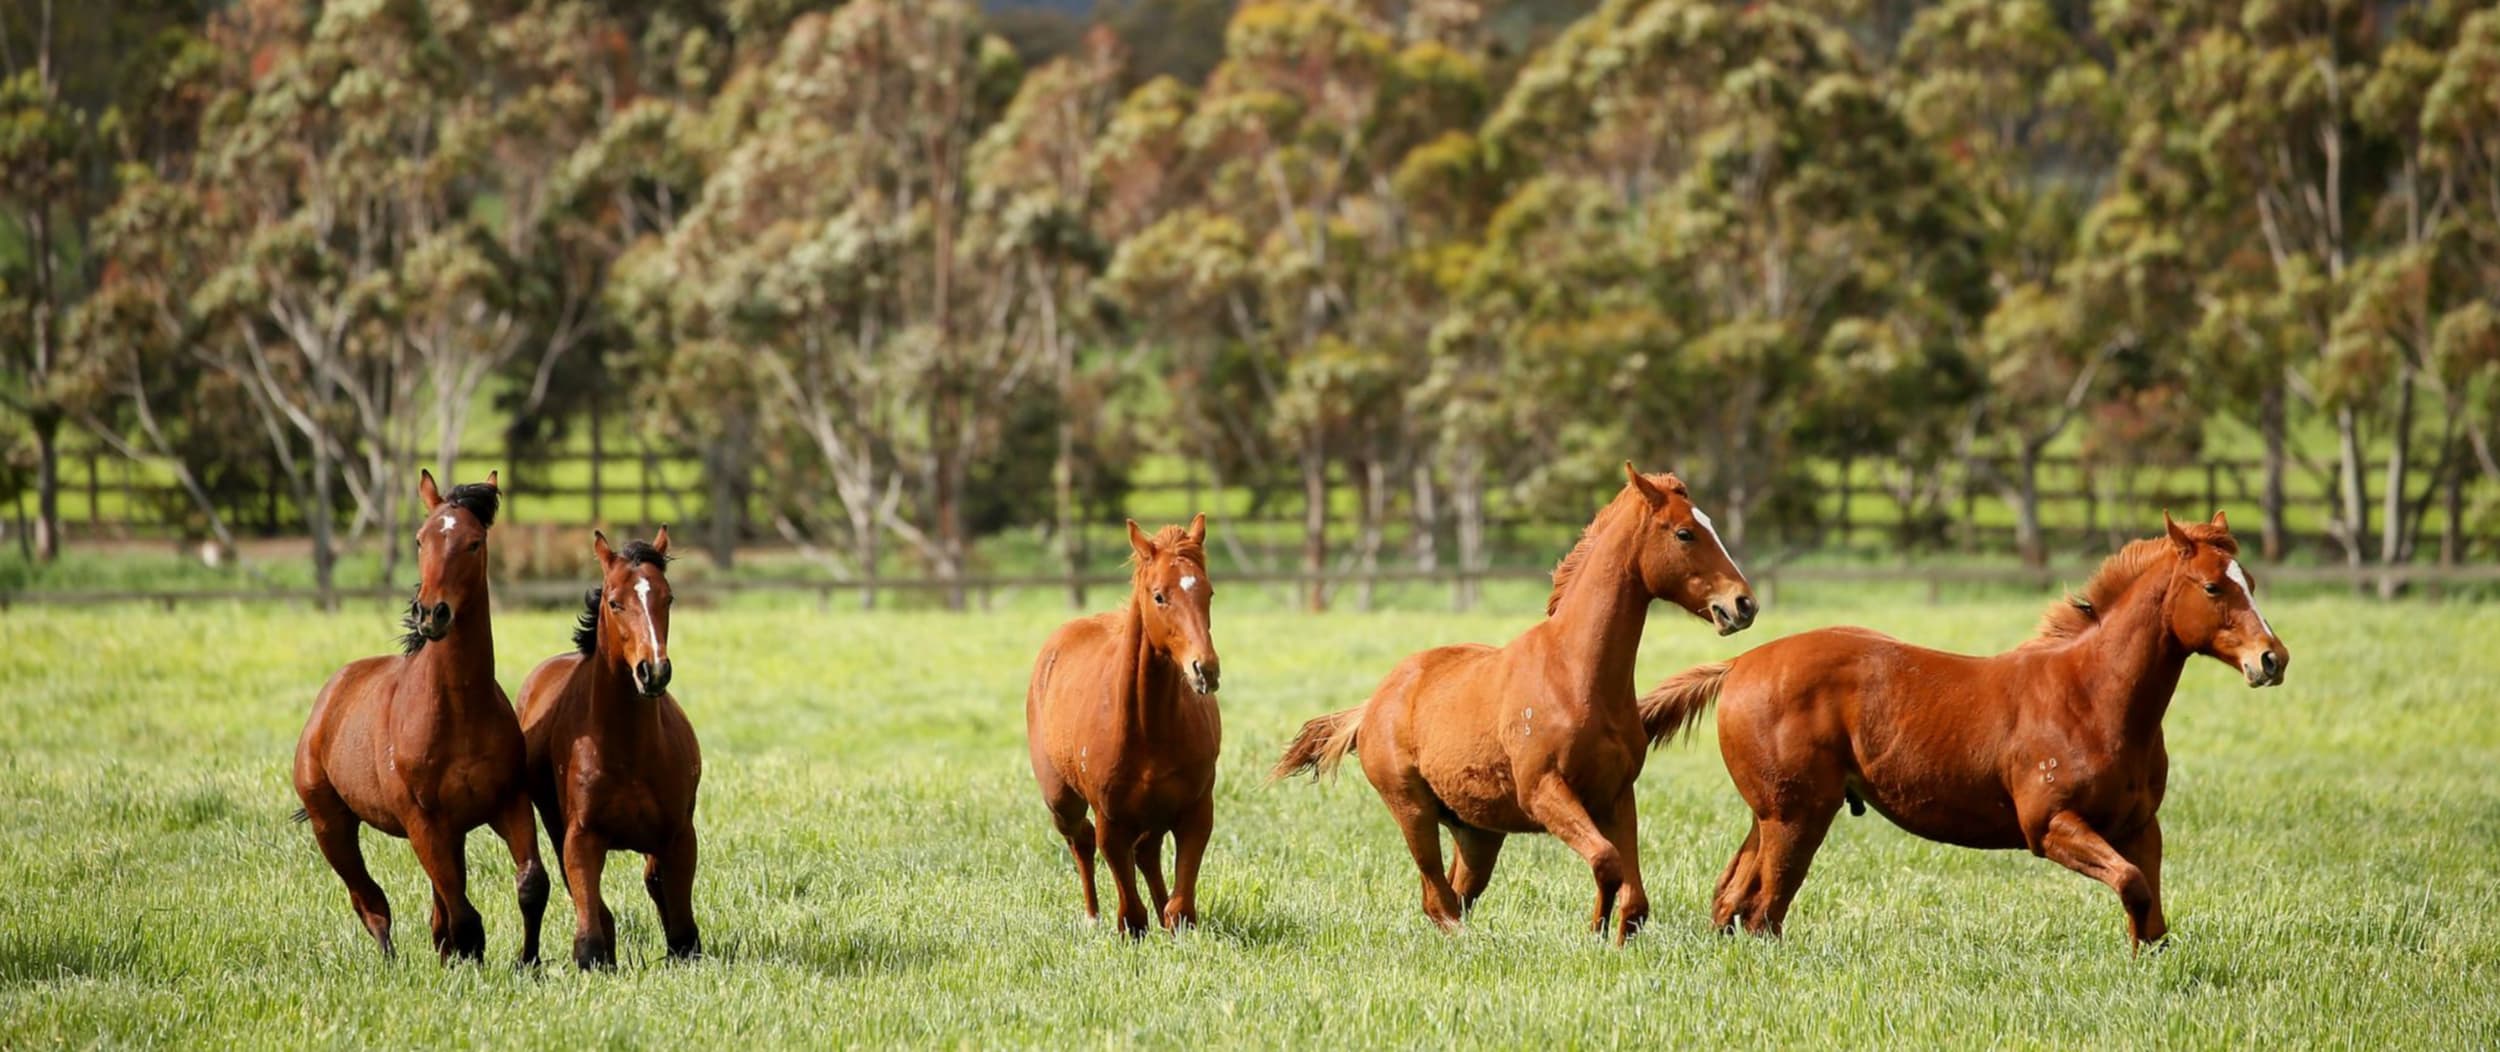 Five thoroughbred horses galloping in a field.